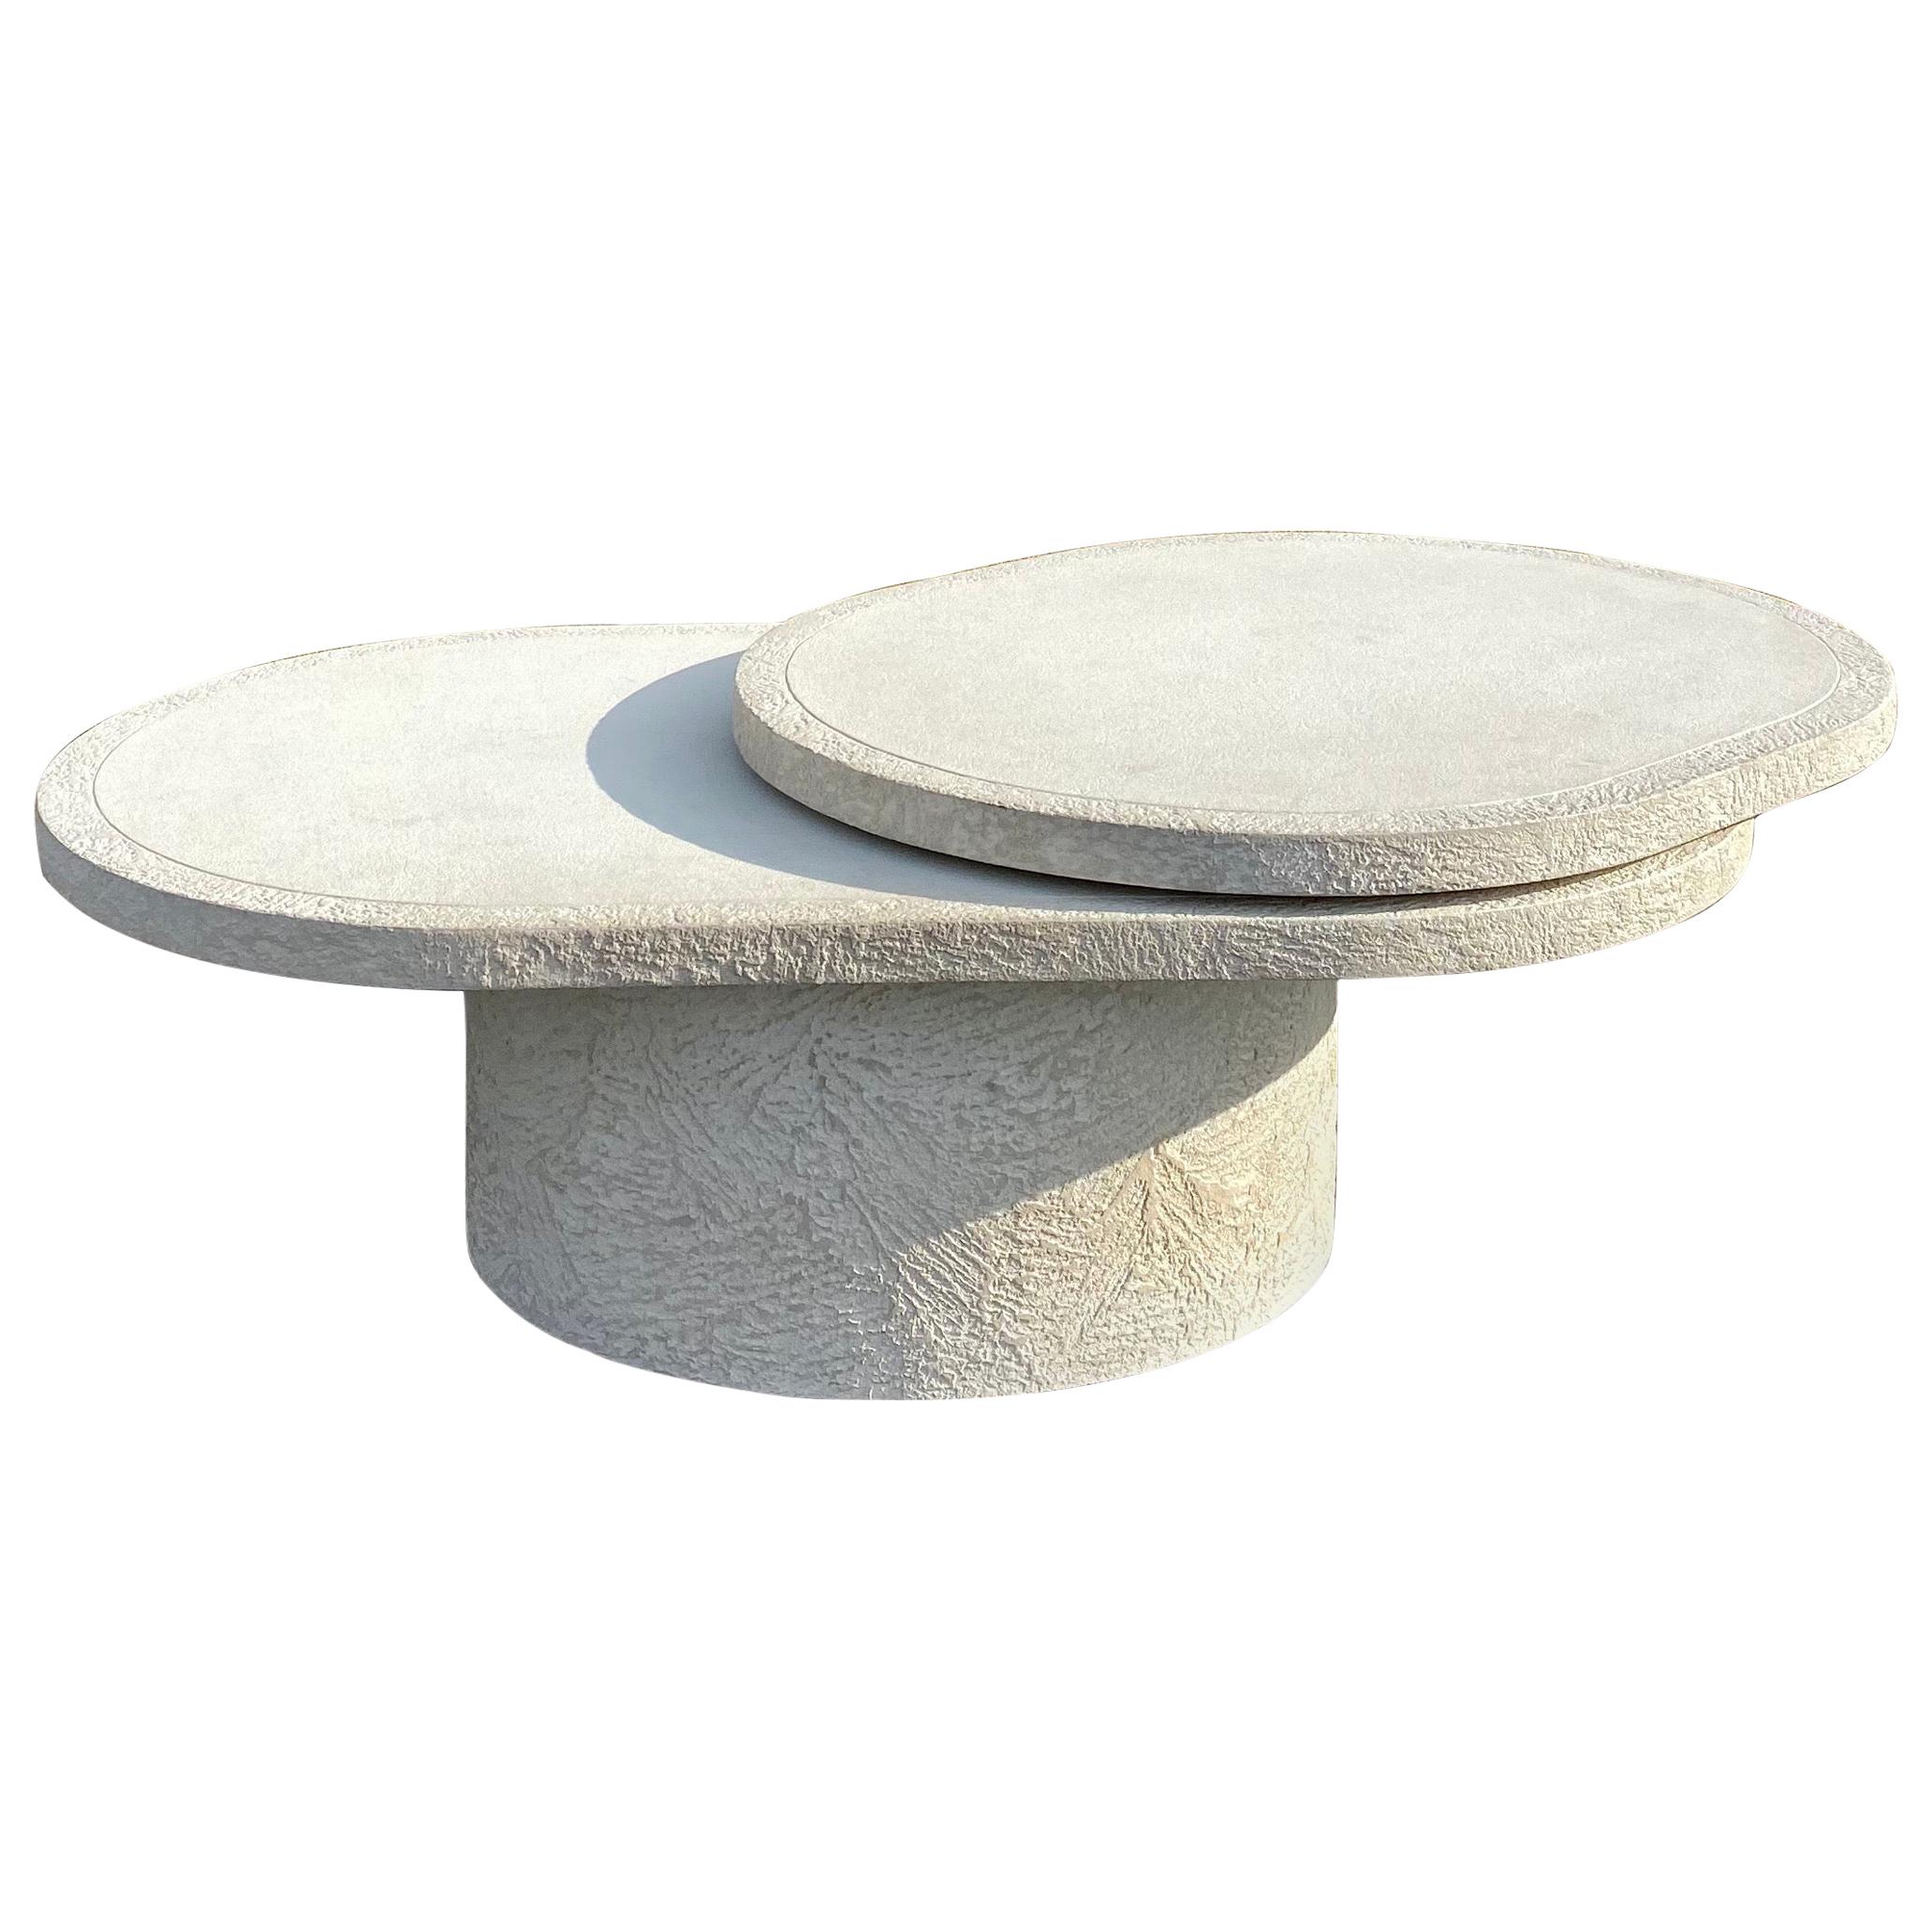 Sculptural Plaster Swiveling Oval Two-Tier Coffee Table, Mid-Century Modern 1970